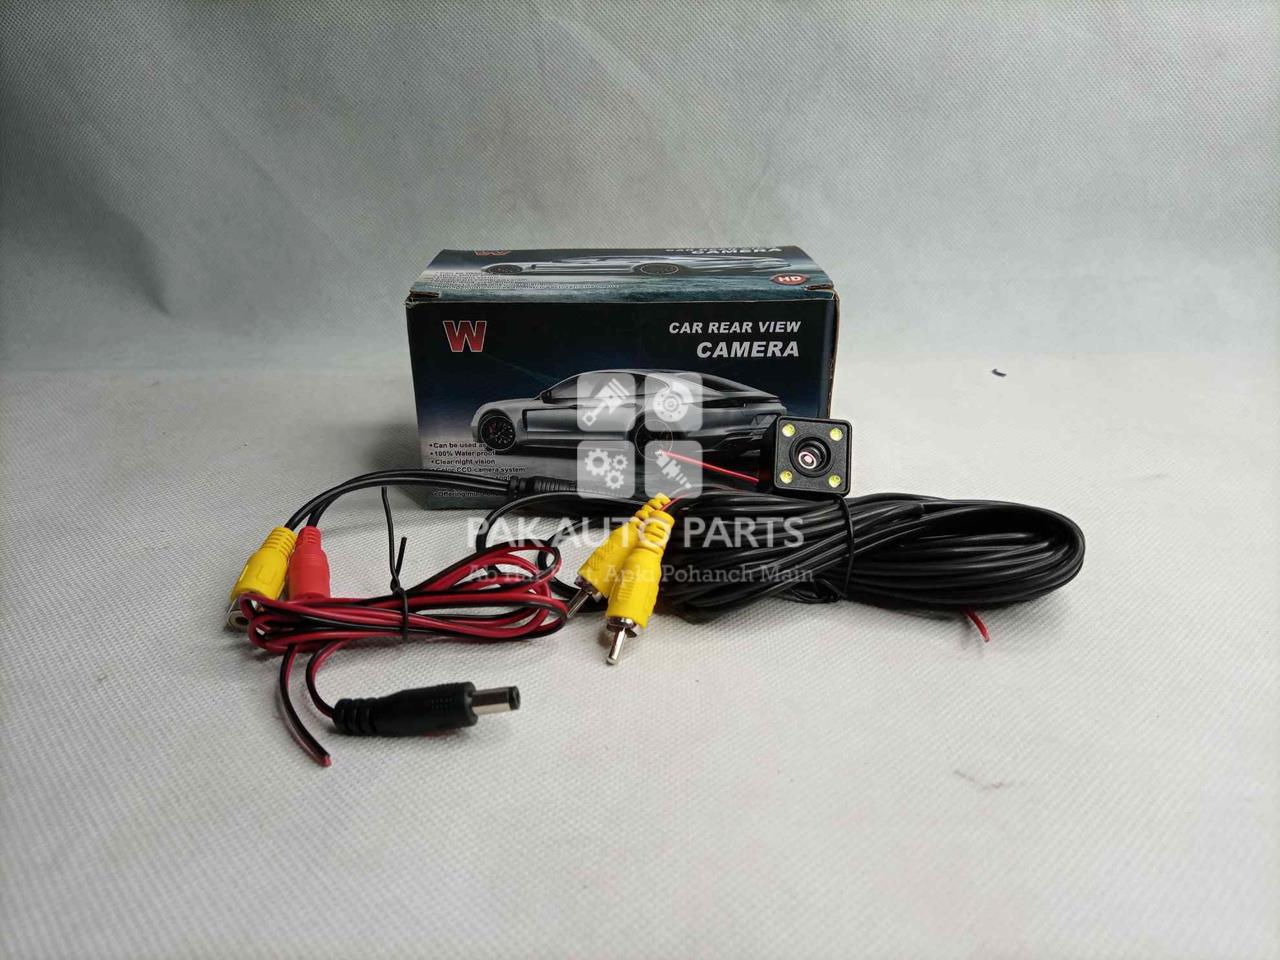 Picture of Car Rear View Camera Universal